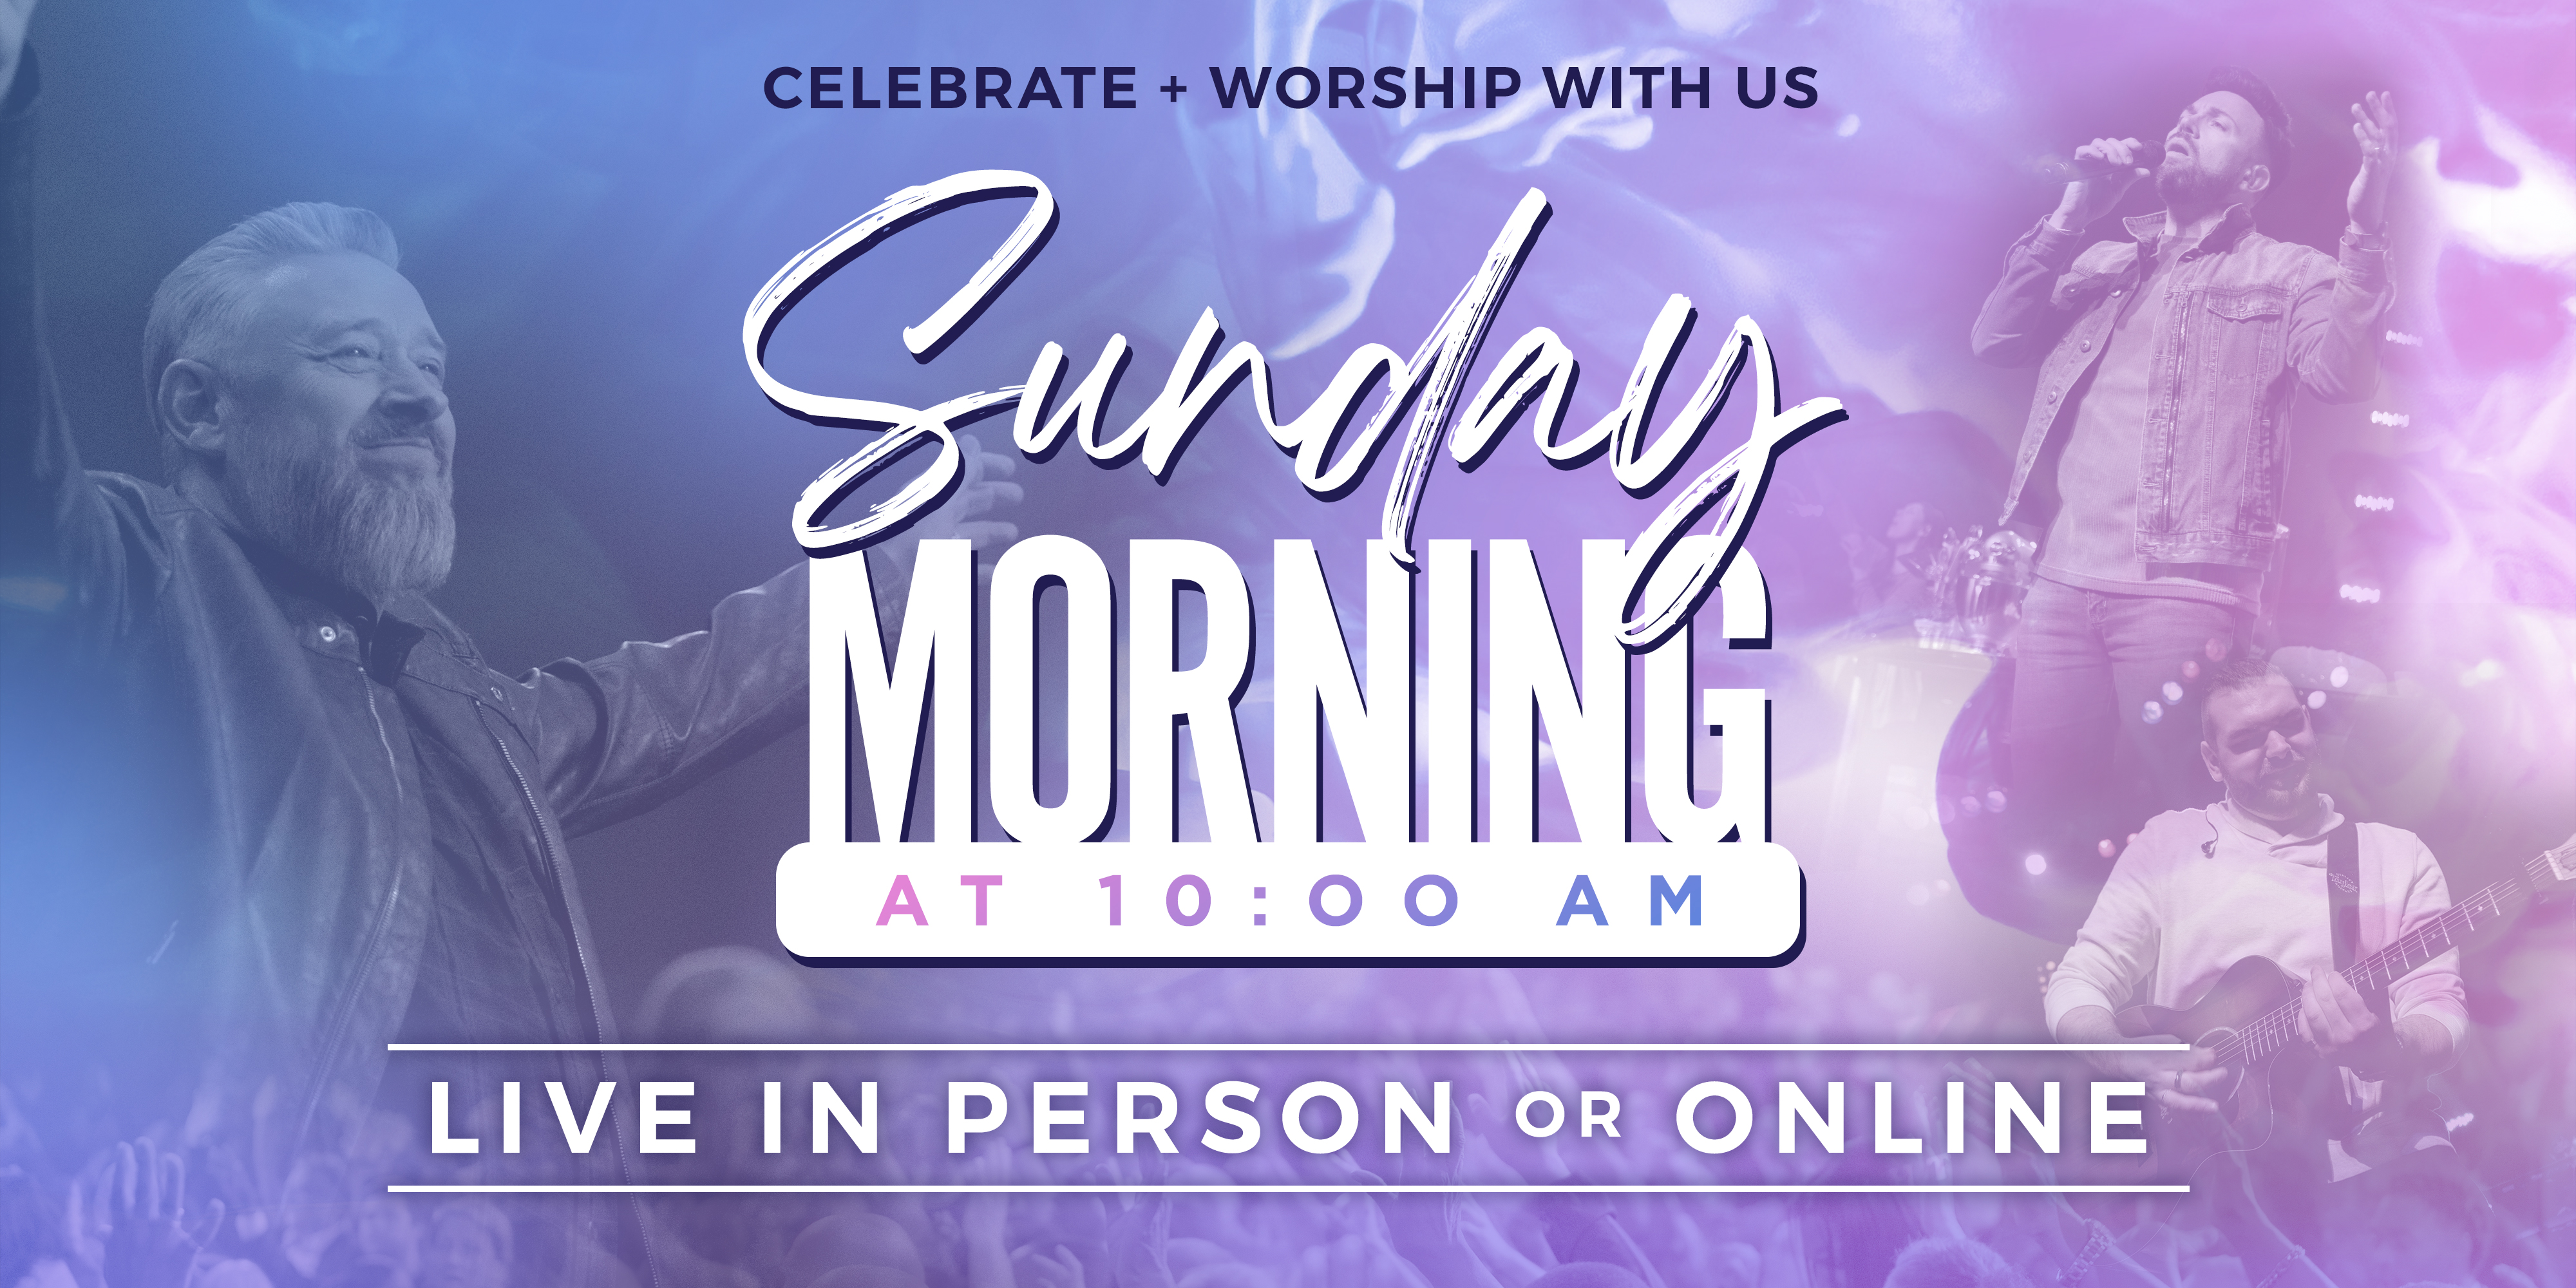 Celebrate + Worship with us Sunday Morning at 10AM Live In Person or Online